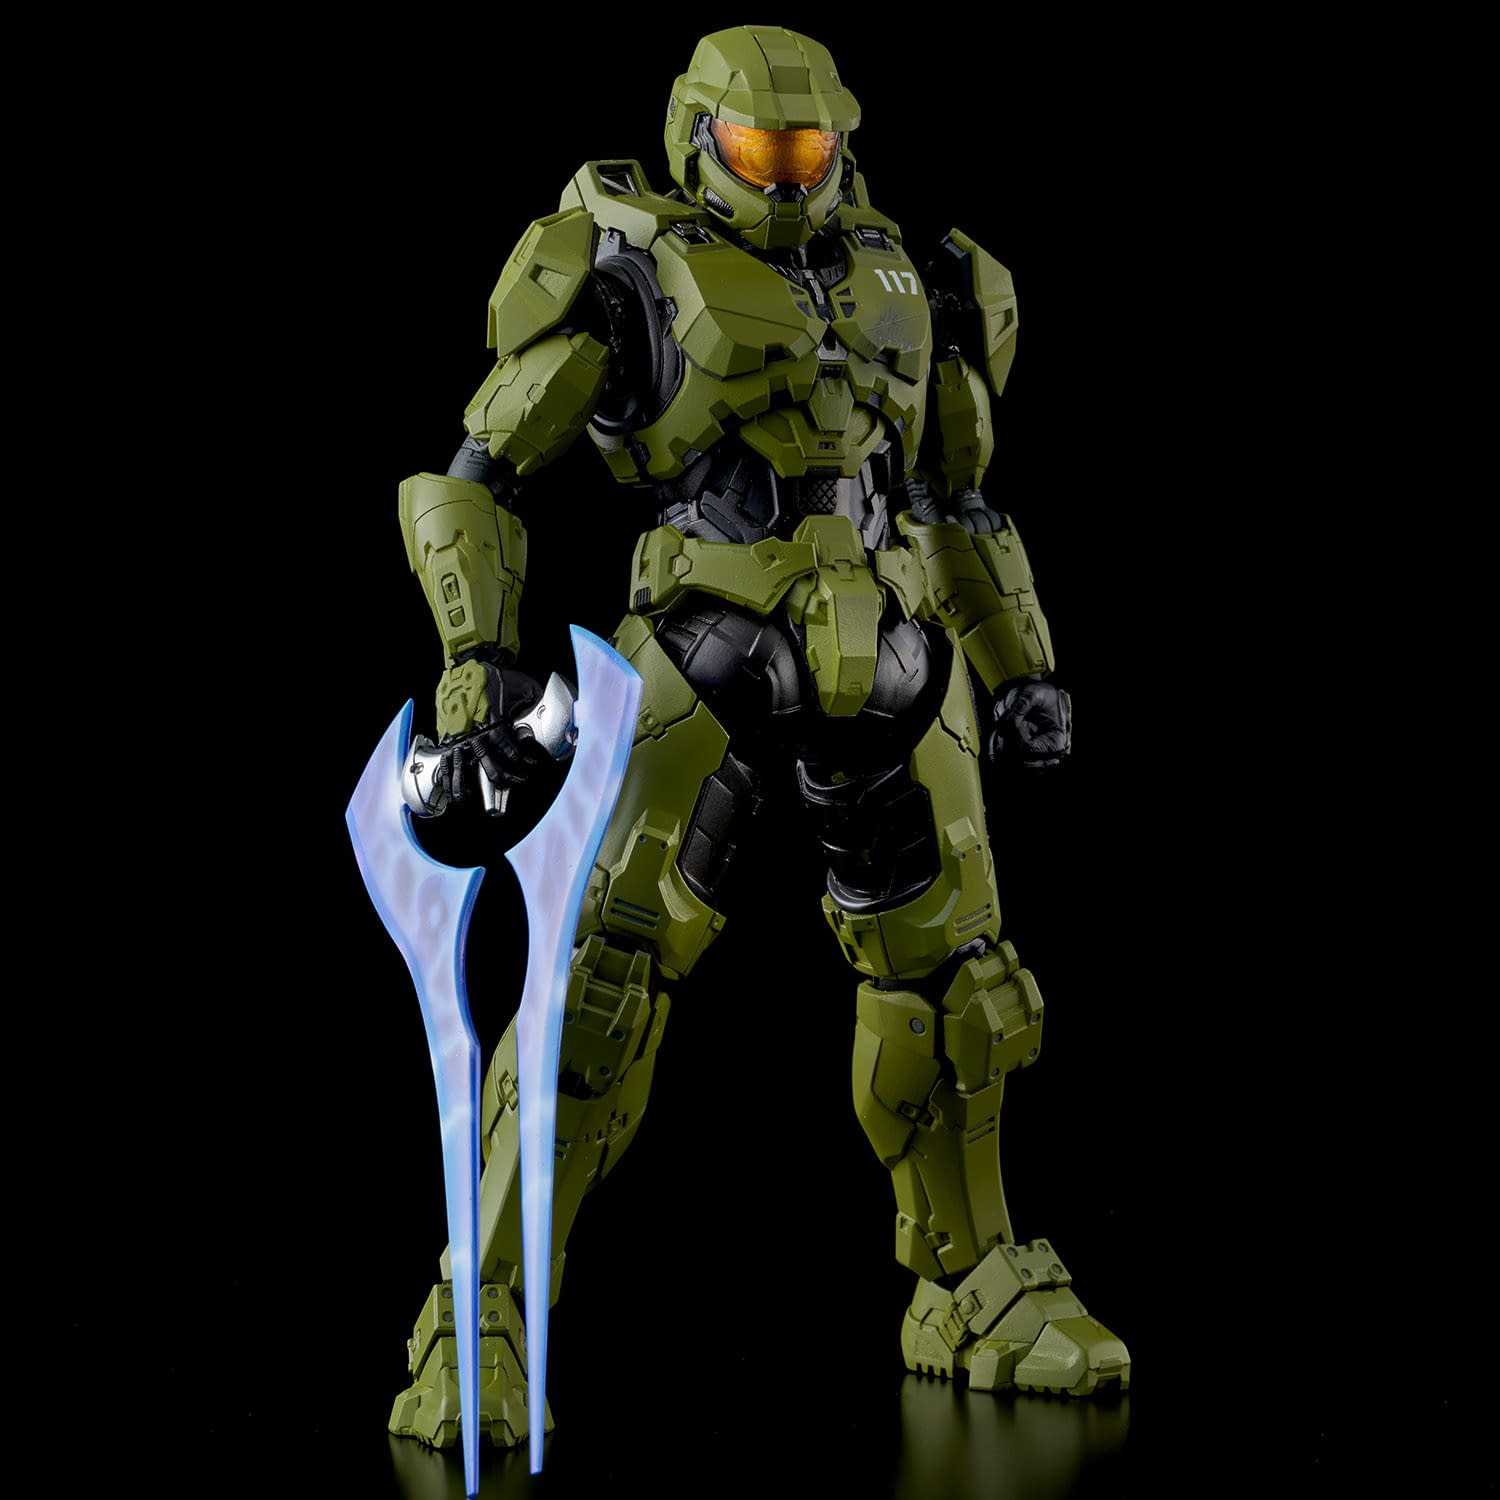 Toys Halo Infinite Master Chief Tumblr Pics | The Best Porn Website